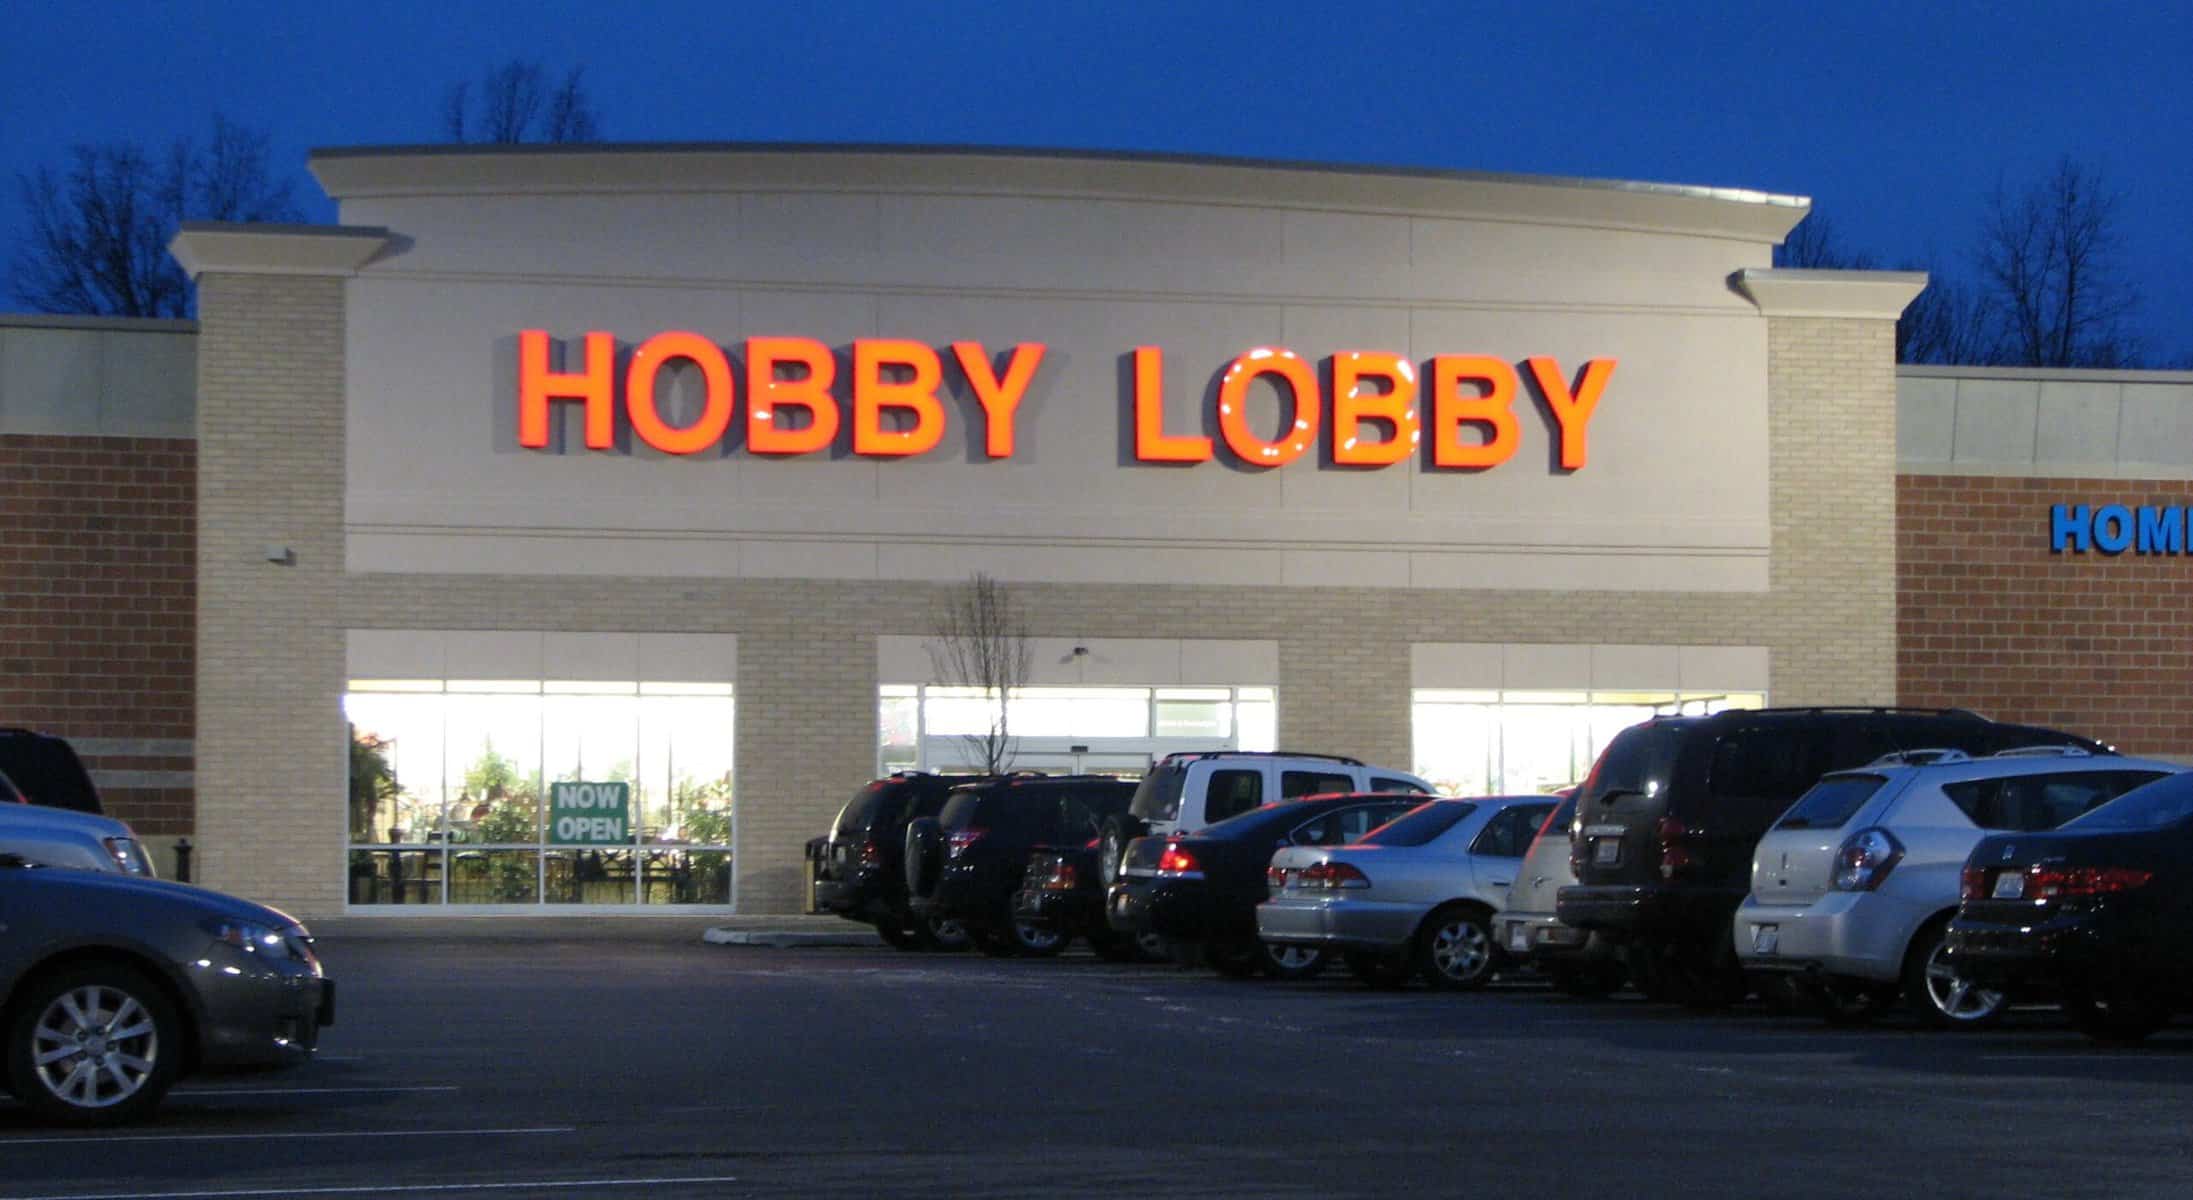 A from the parking lot shot of the front of a Hobby Lobby storefront